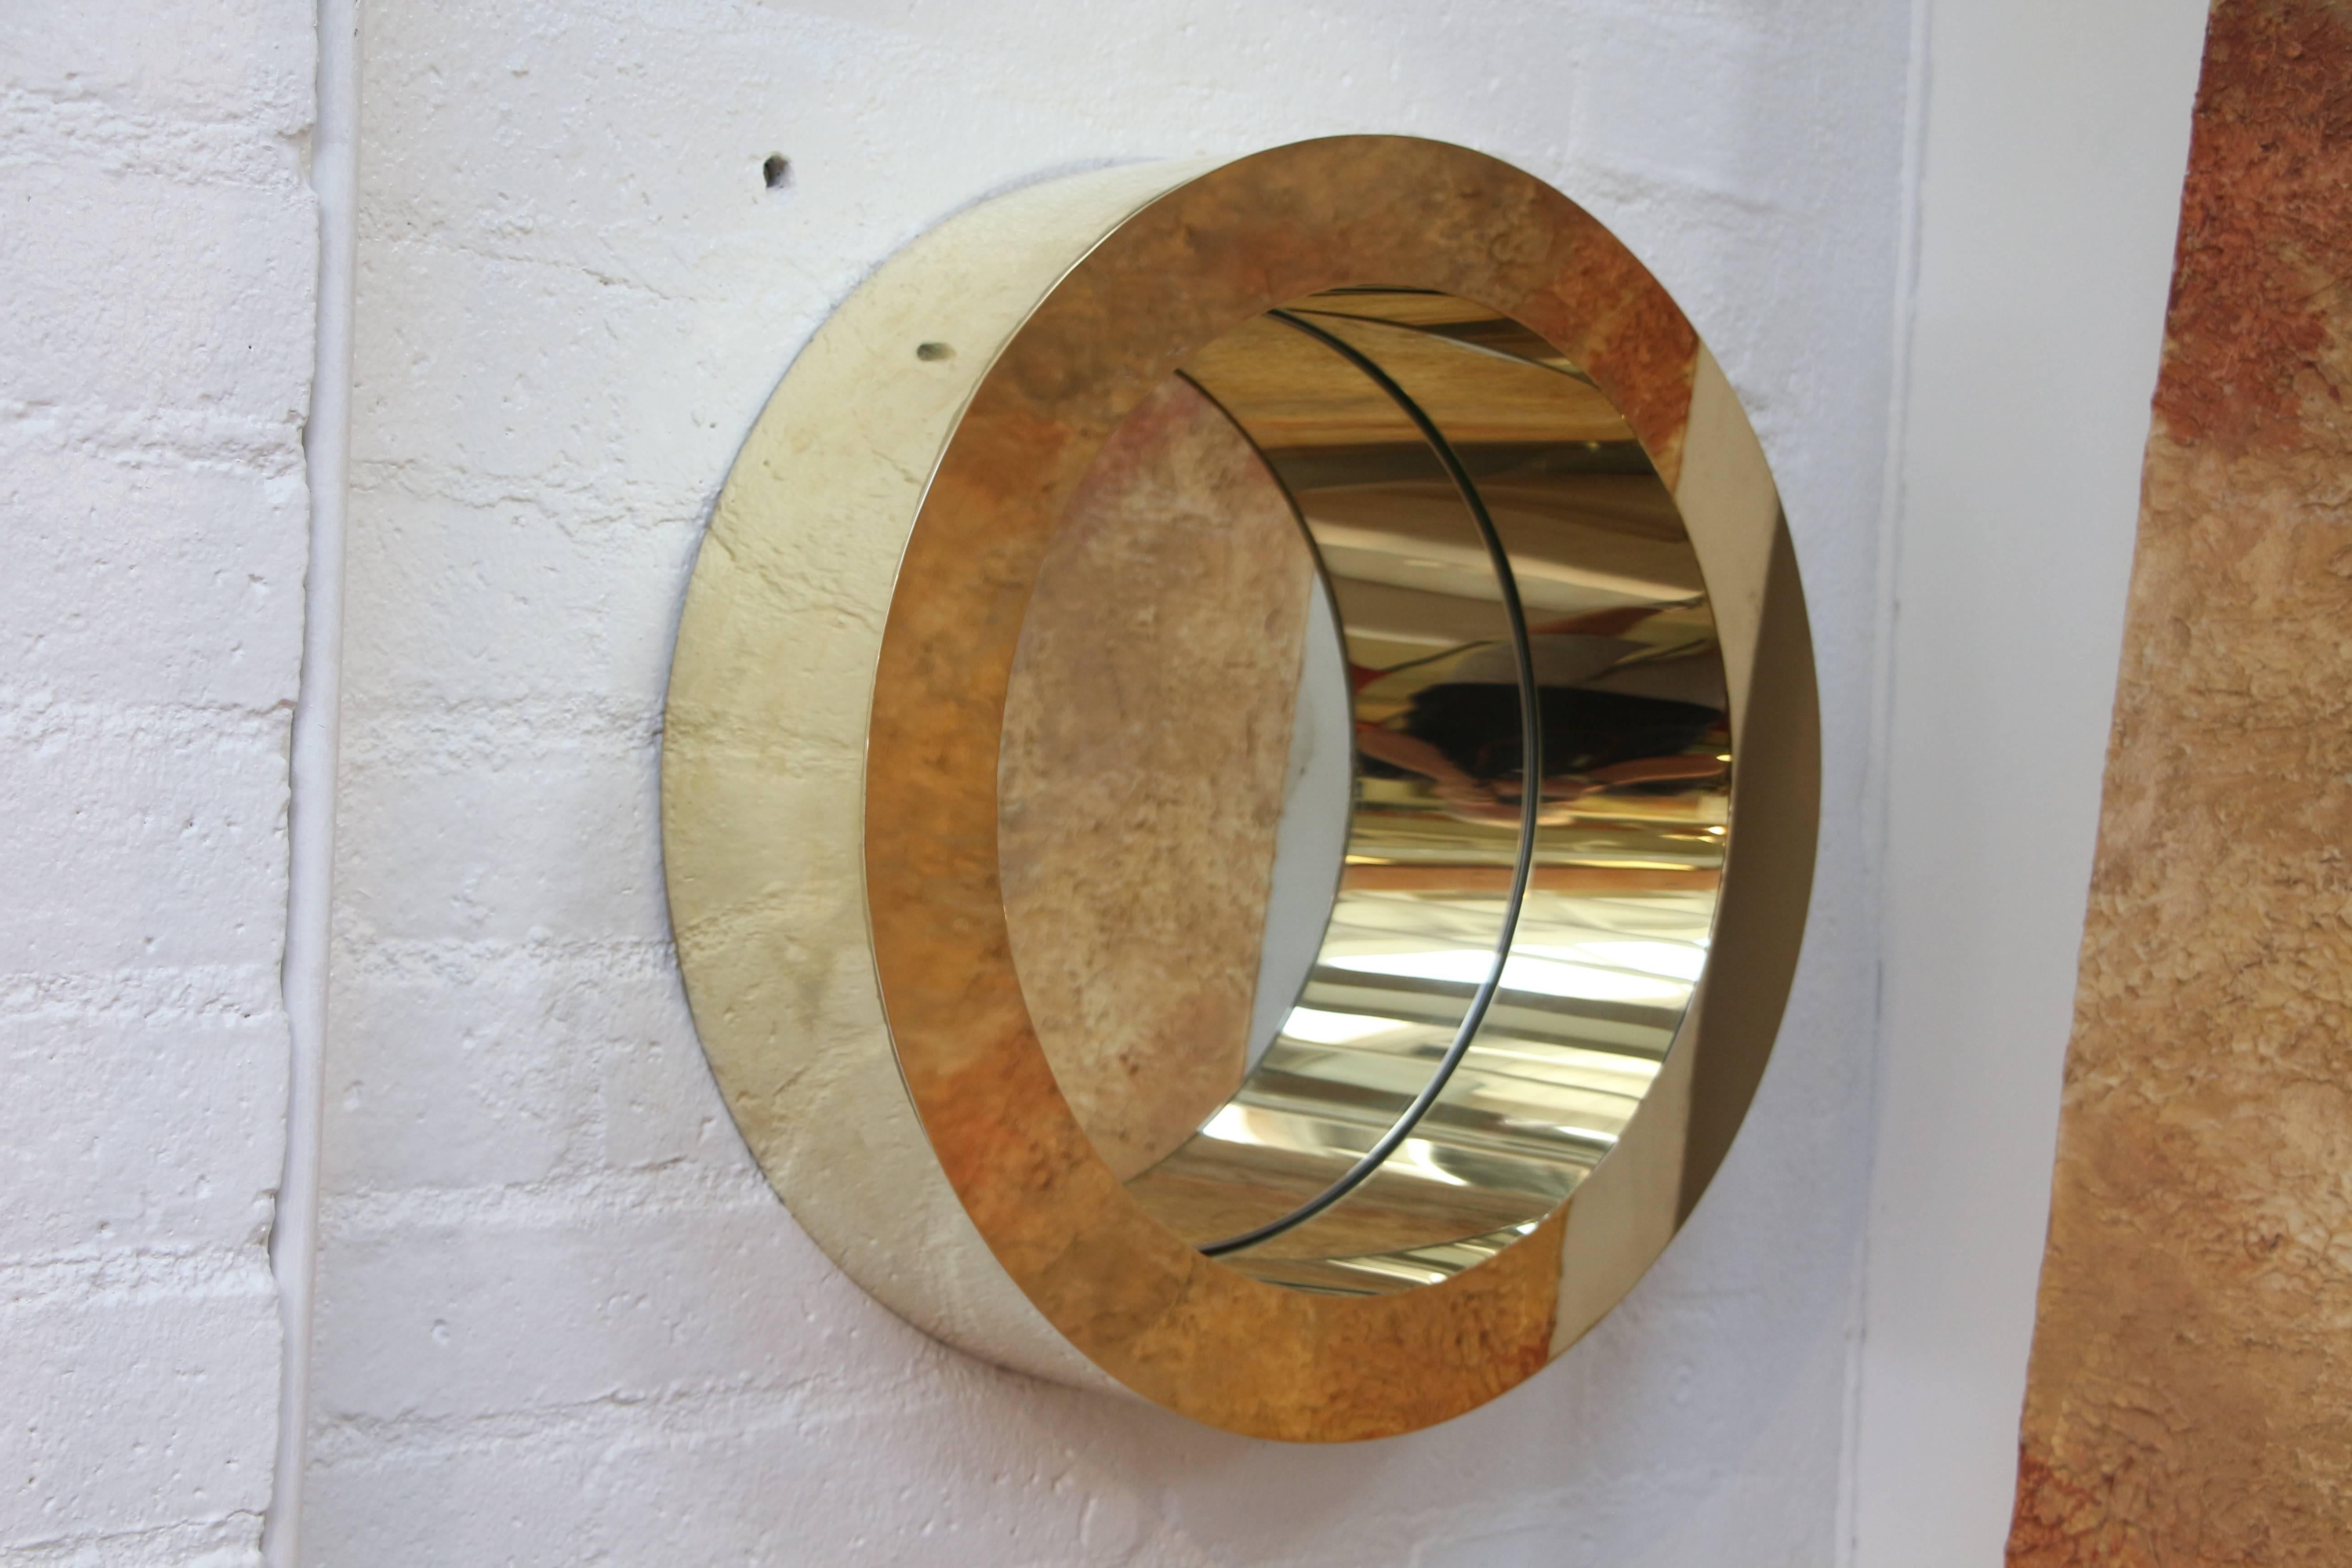 A nice porthole mirror from Curtis Jere. We have had it polished so the signature is lost. I should have taken a pic of it but forgot to. In nice condition, although there is a small ding and a ripple along the edges. There may be some other marks